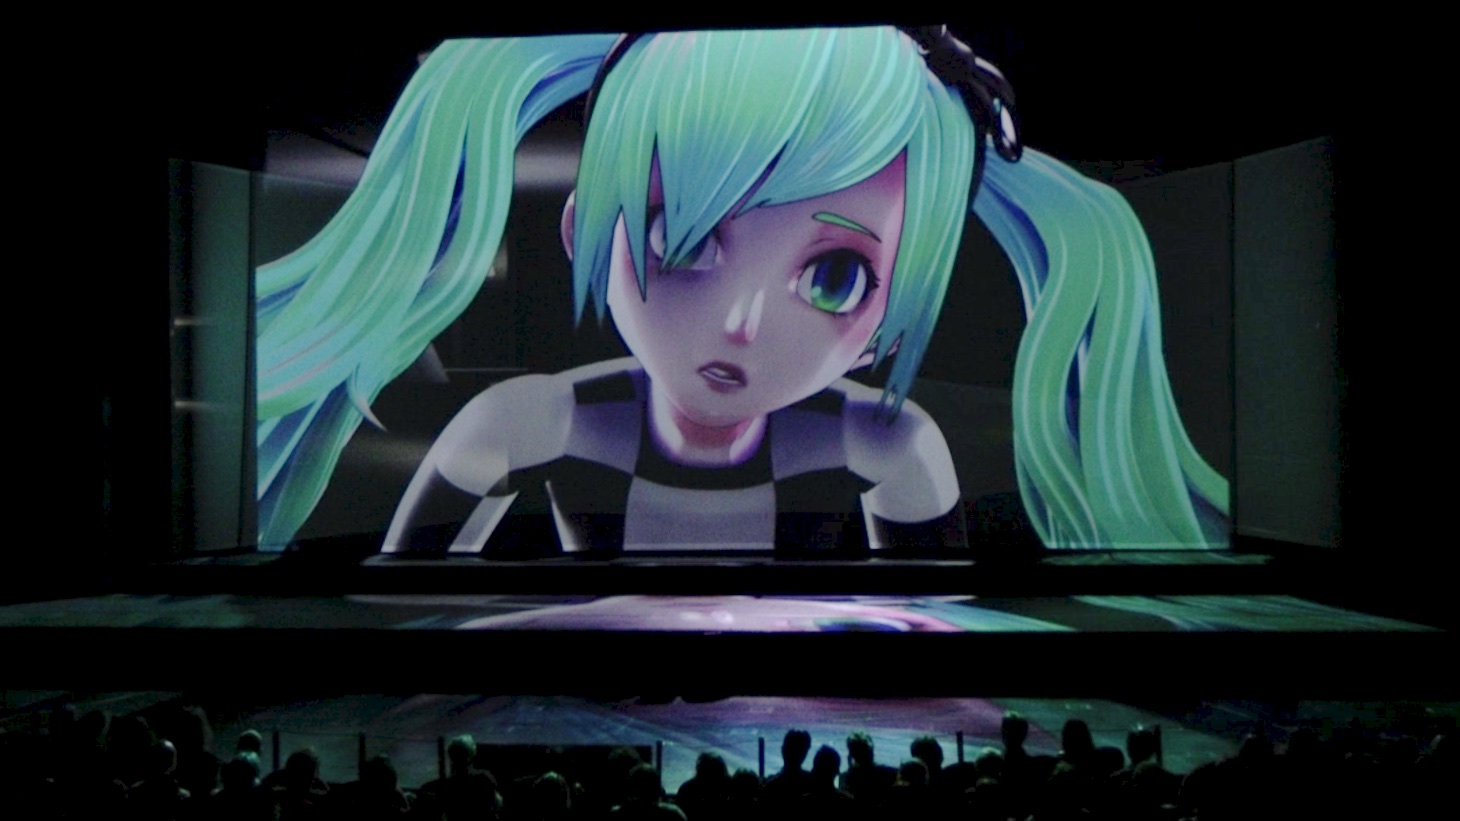 Miku Hatsune’s Vocaloid Opera “THE END” to Be Performed in Shanghai Next!